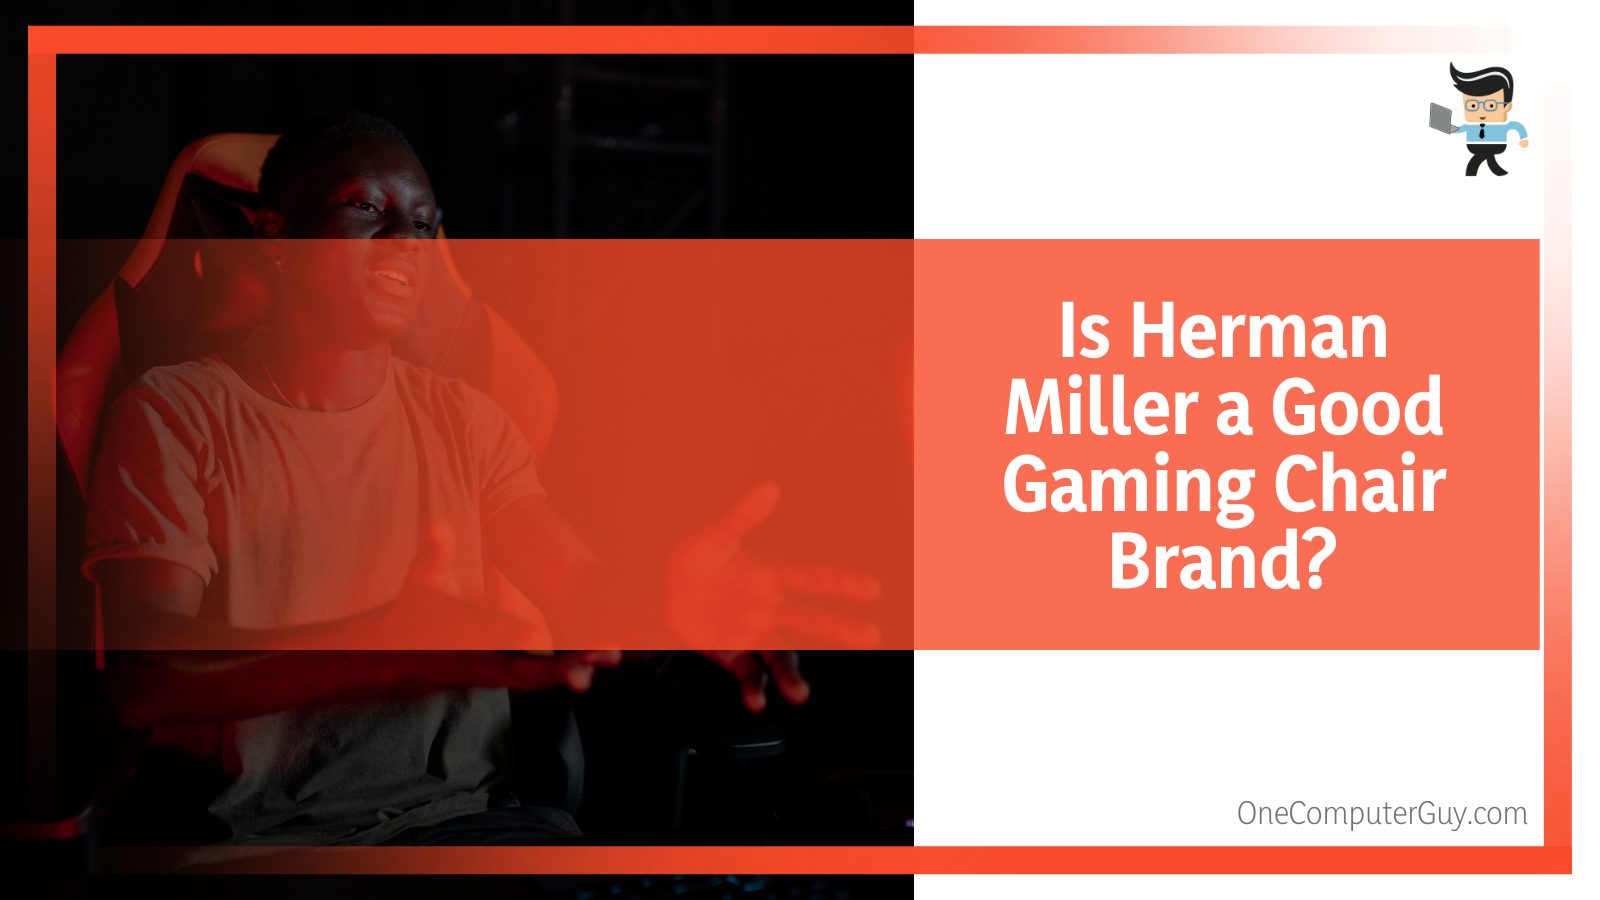 Is Herman Miller a Good Gaming Chair Brand